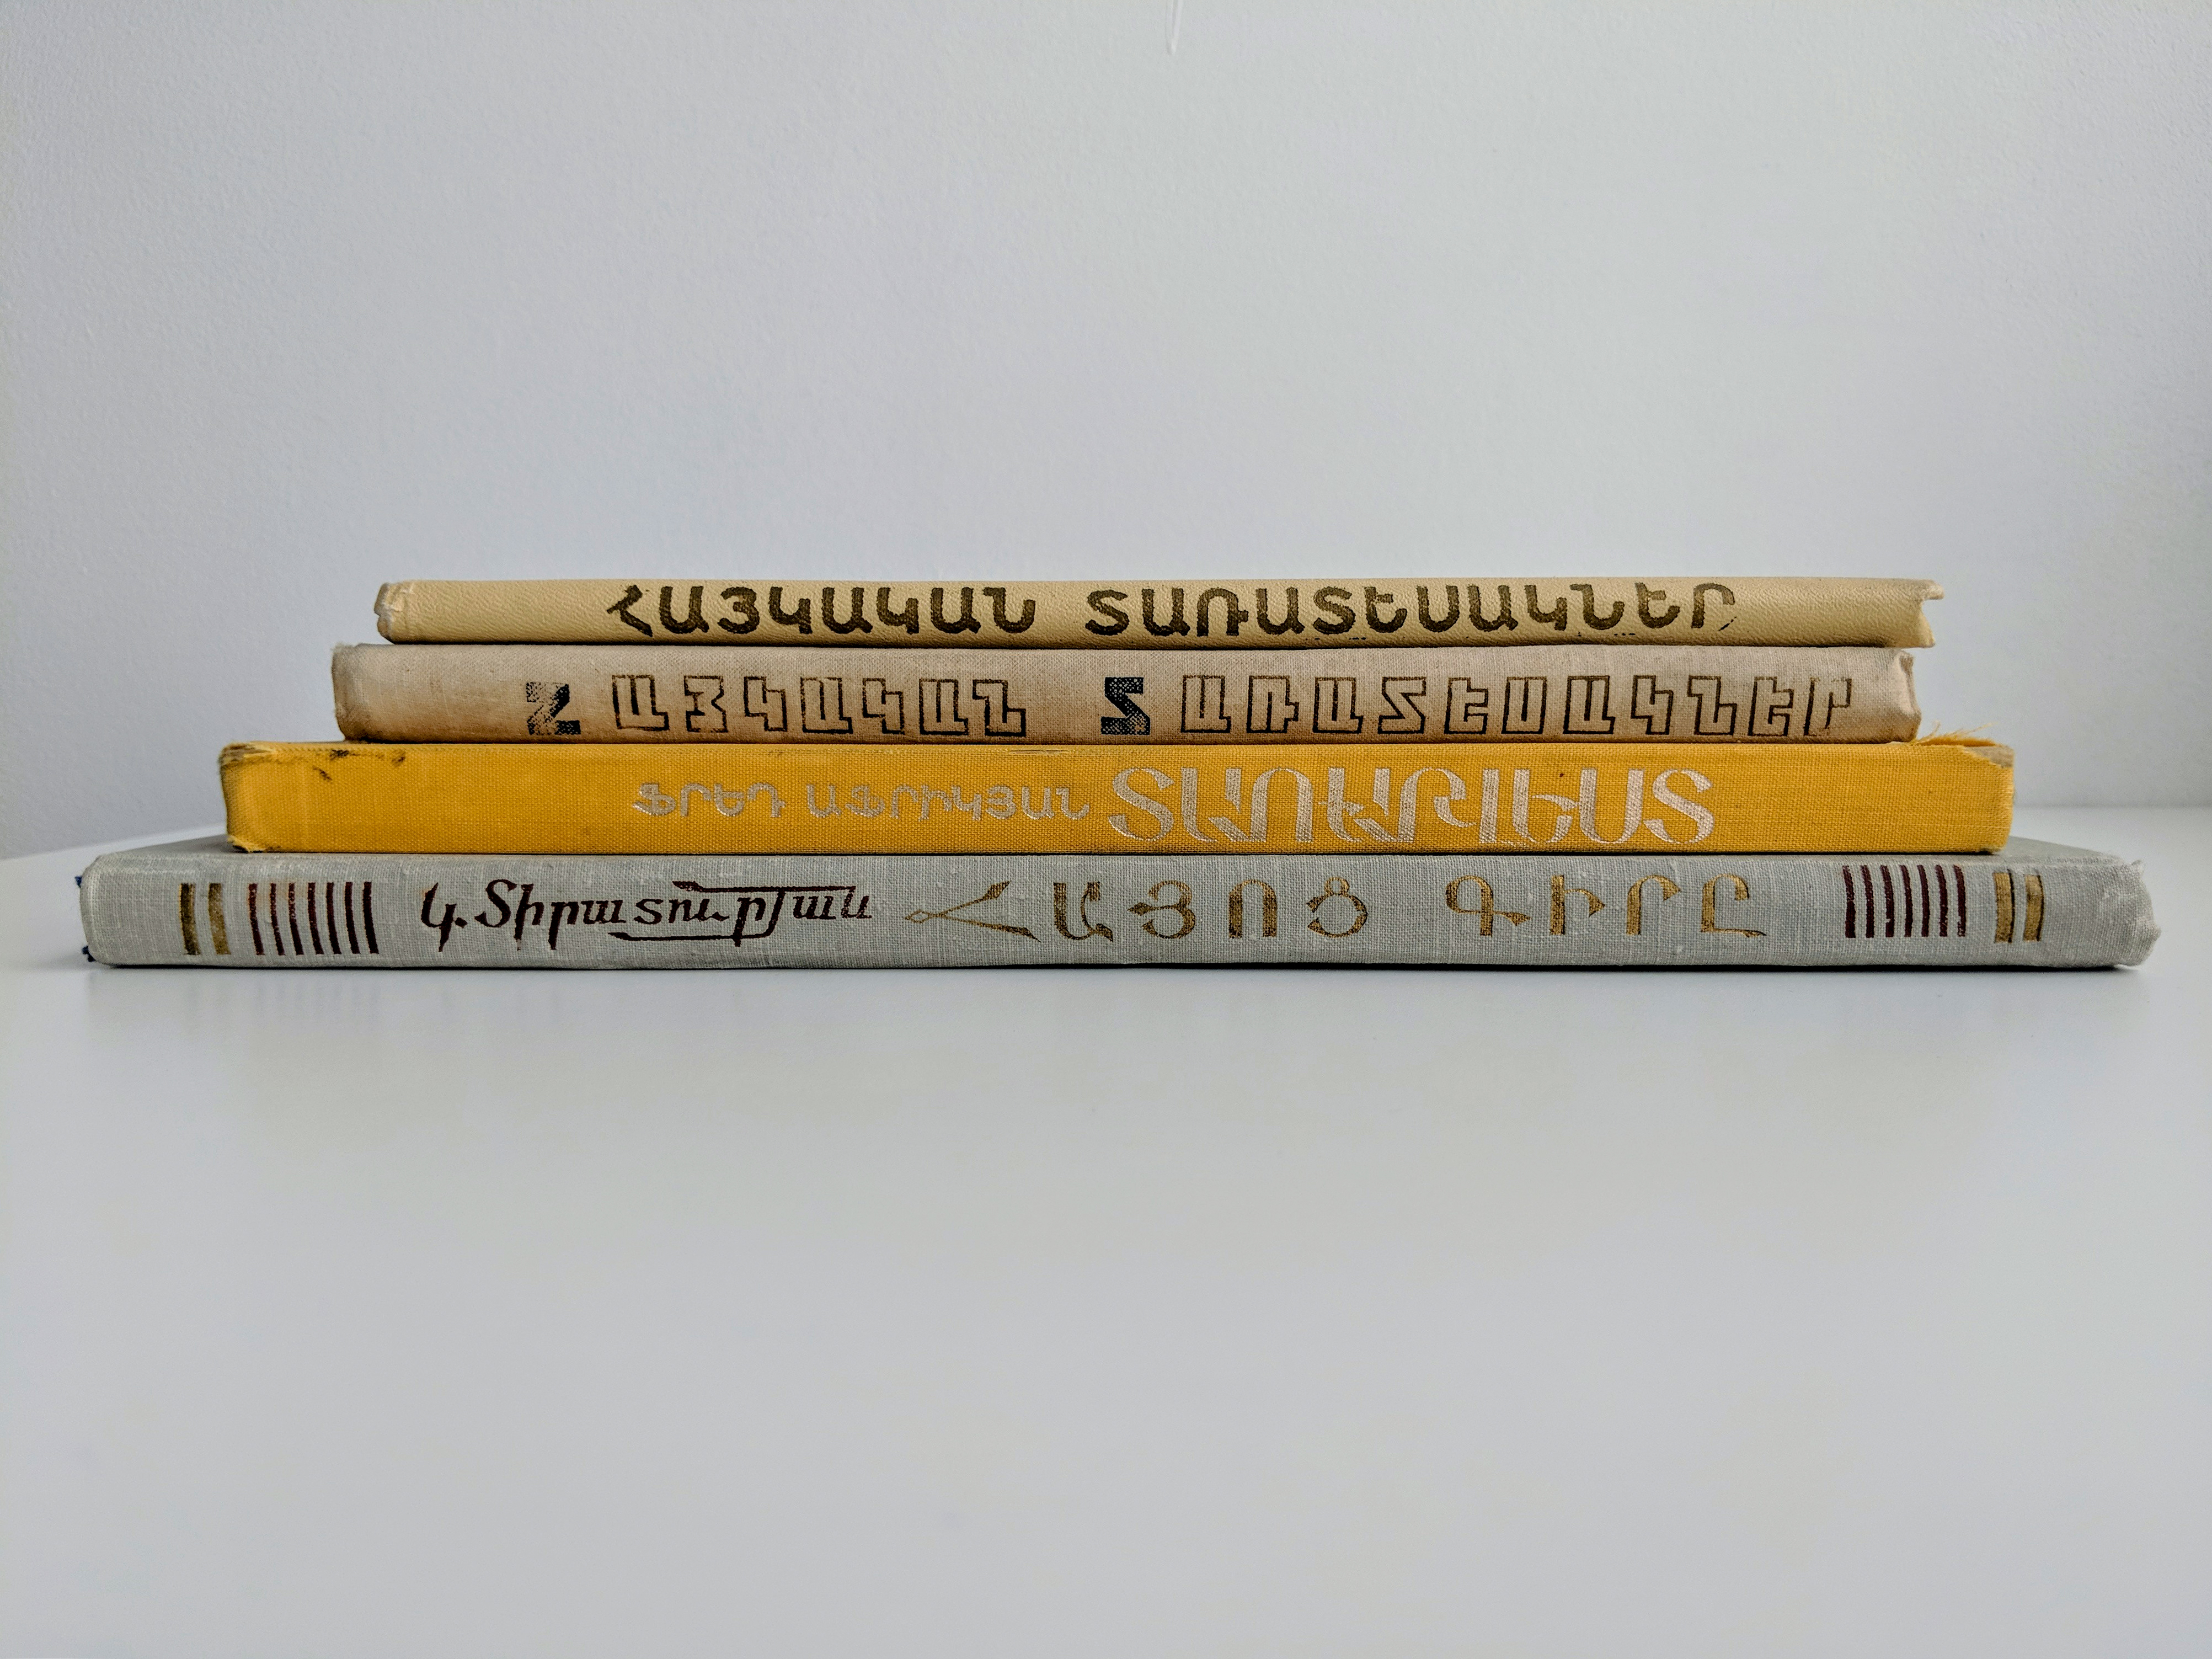 Photograph of a stack of lettering manuals, showing the spines.